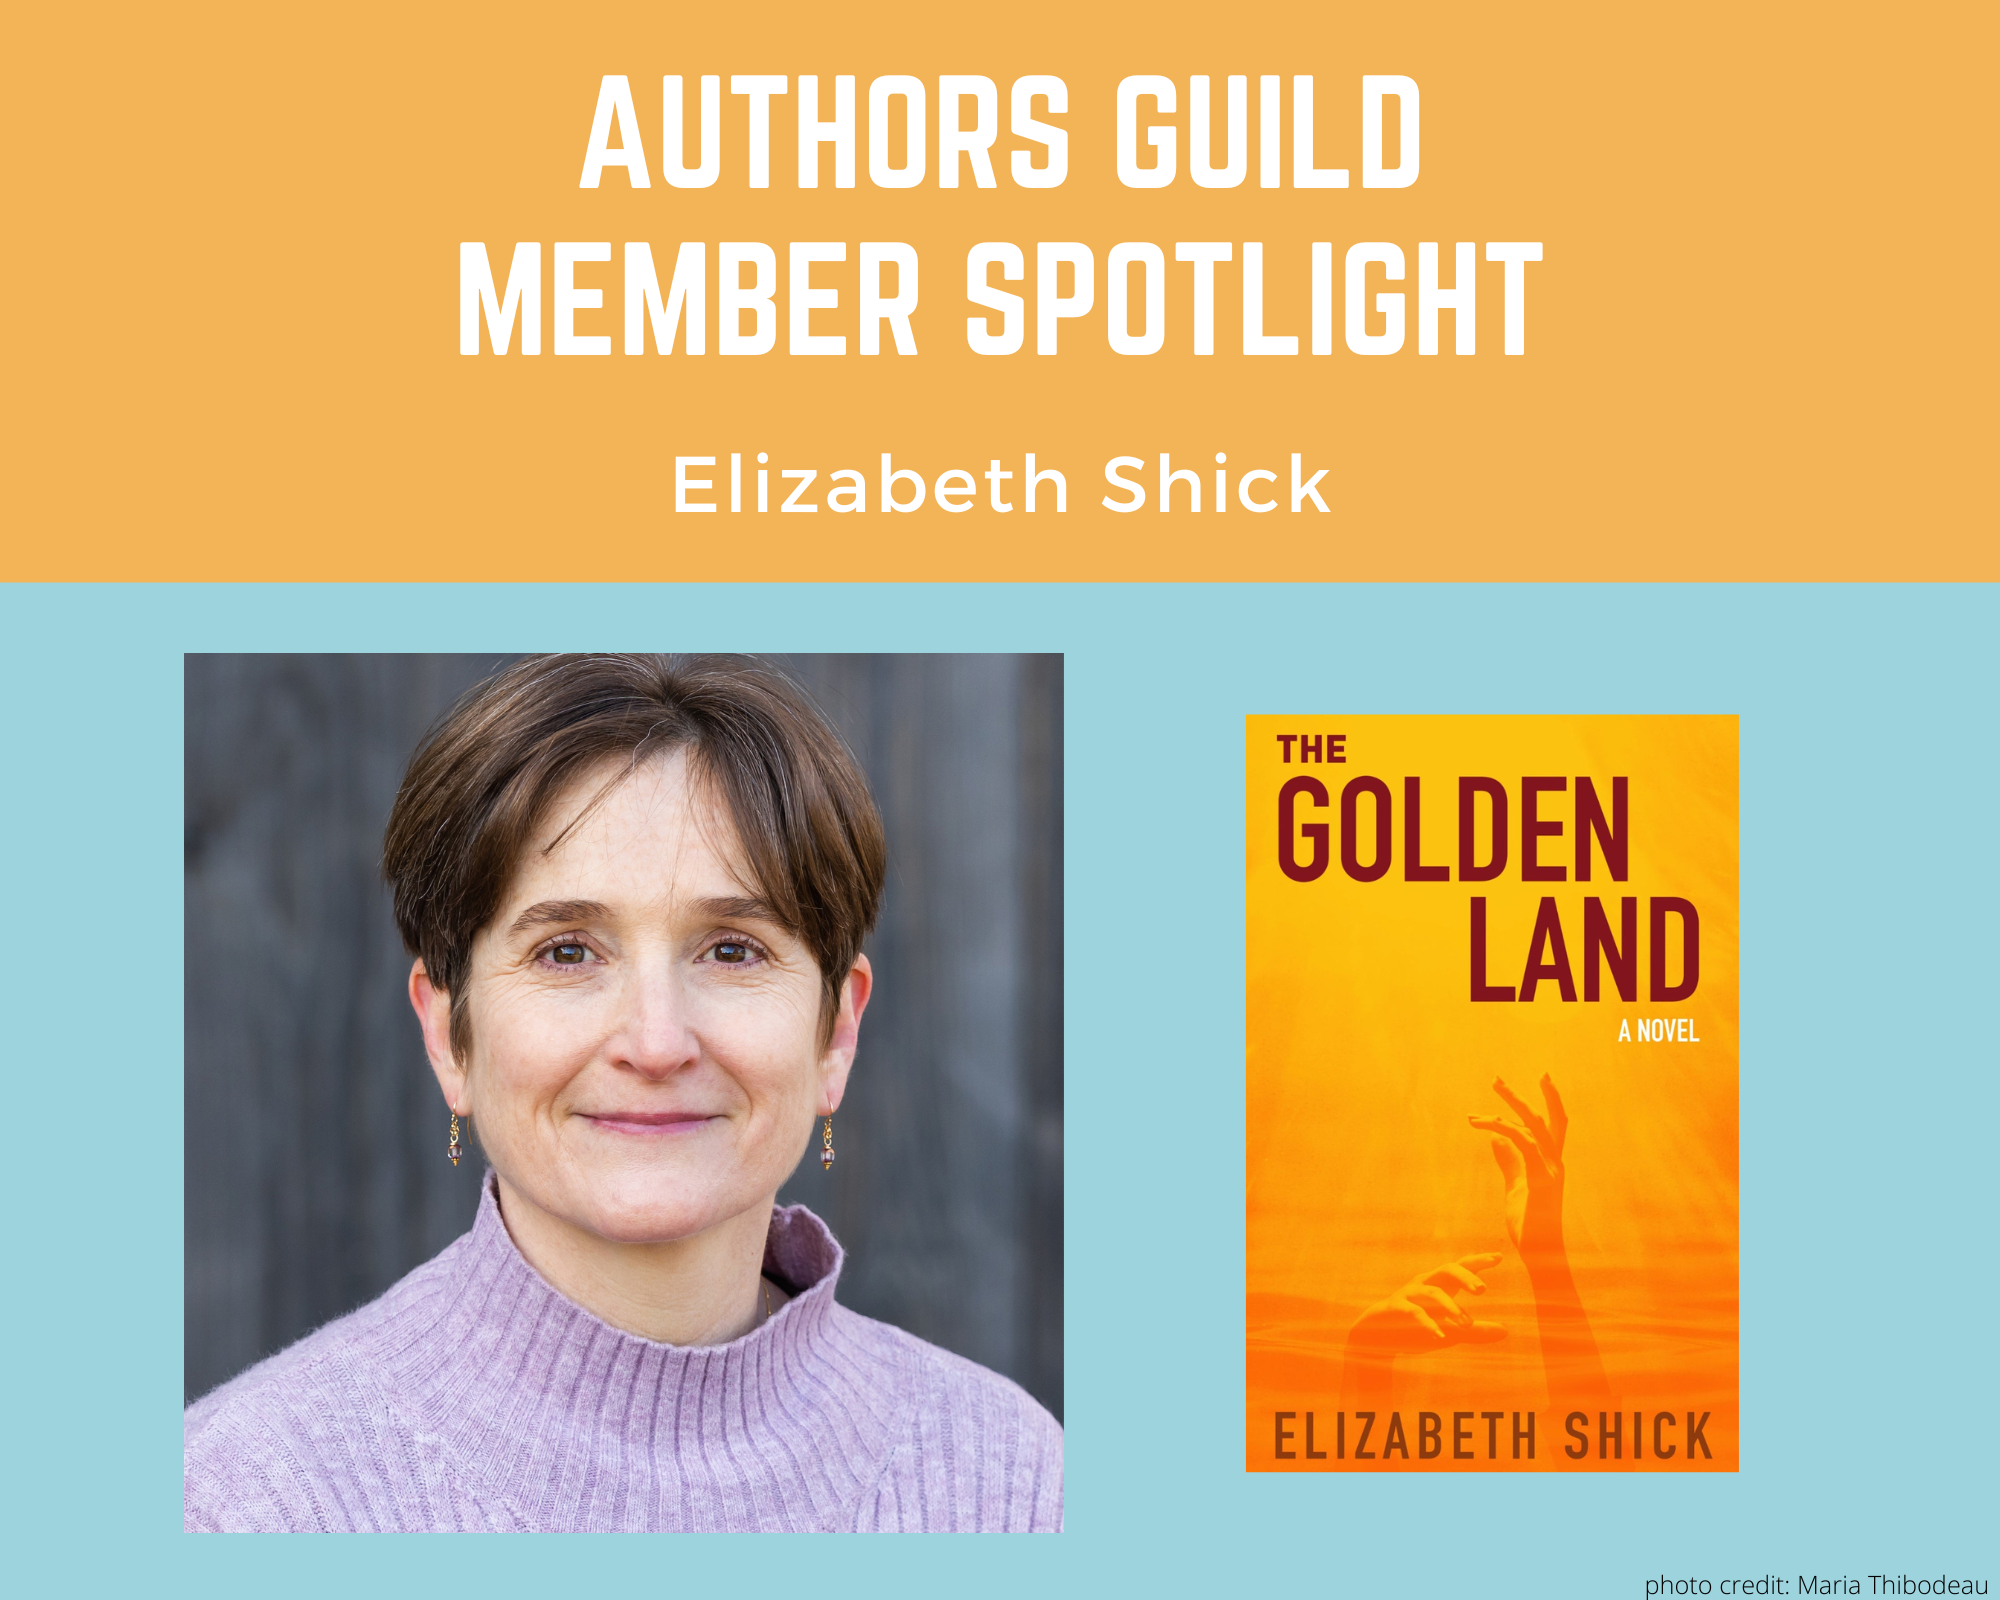 author Elizabeth Shick and an image of her book The Golden Land